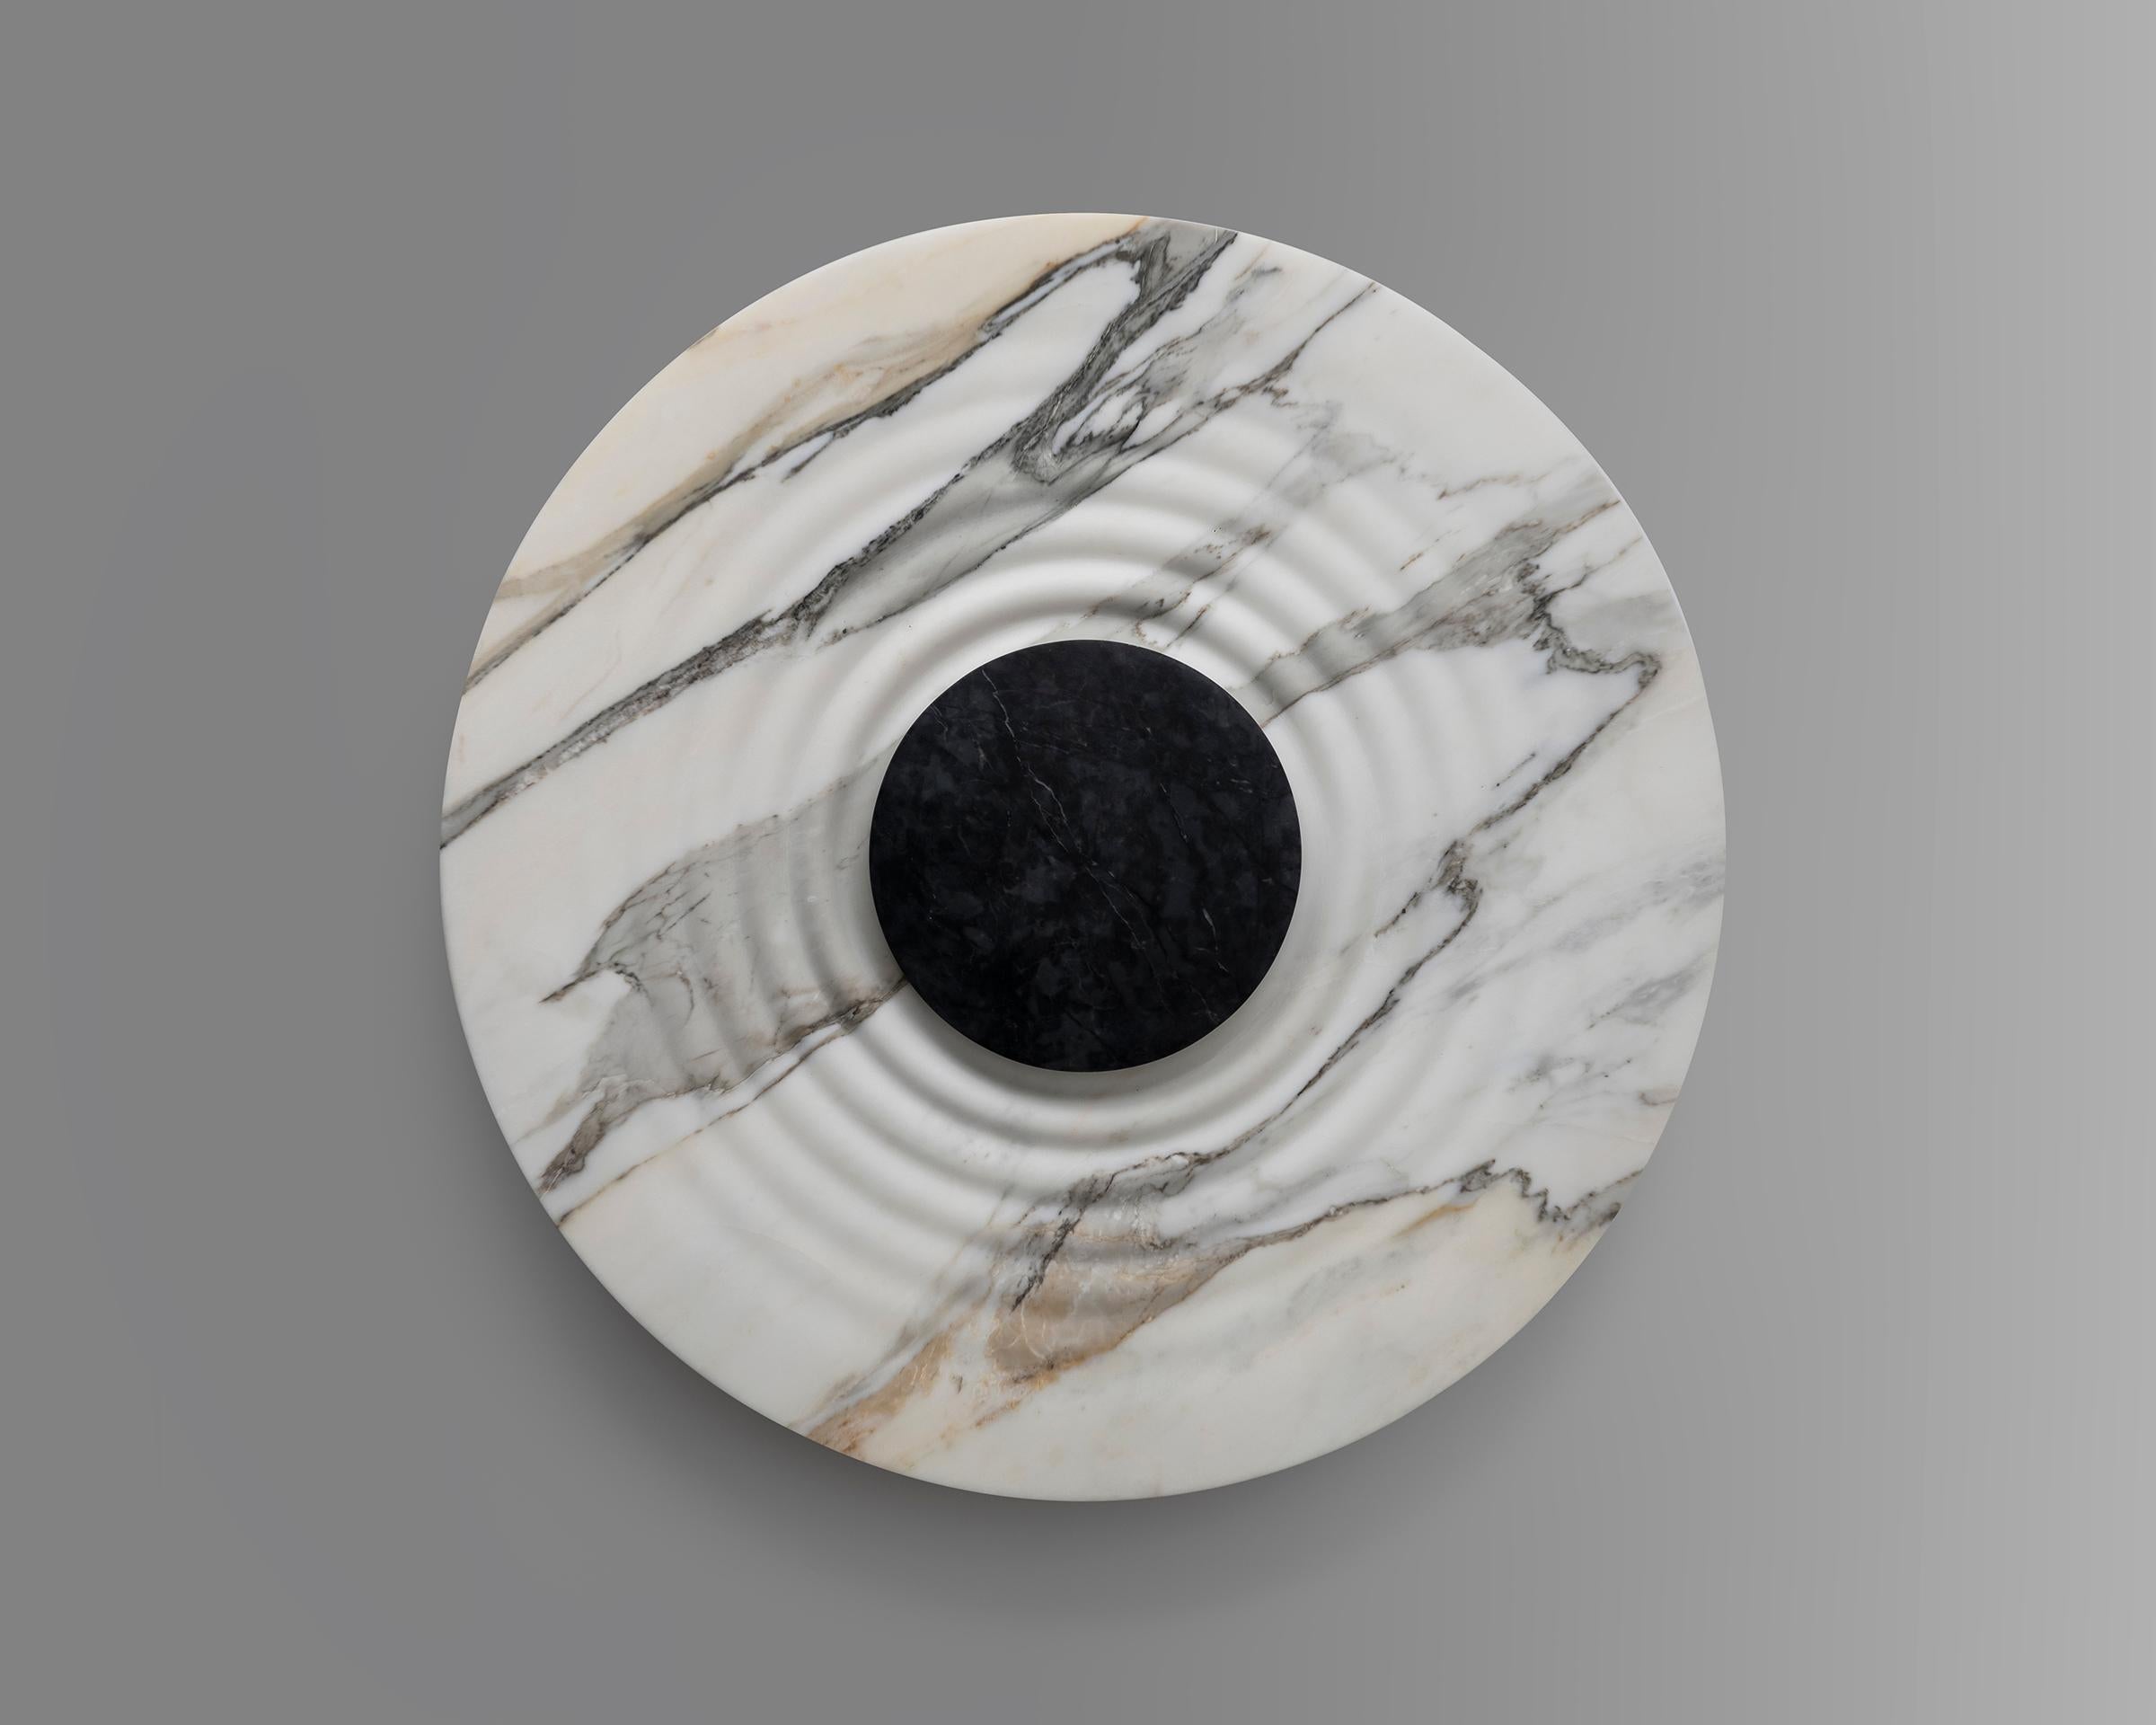 Messier Marble M38 Sconce by Etamorph
Dimensions: Ø 38 x D 10 cm.
Materials: Calacata Marble and Black Matter stone.

Available in Ø 50 and Ø 38 cm. All our lamps can be wired according to each country. If sold to the USA it will be wired for the